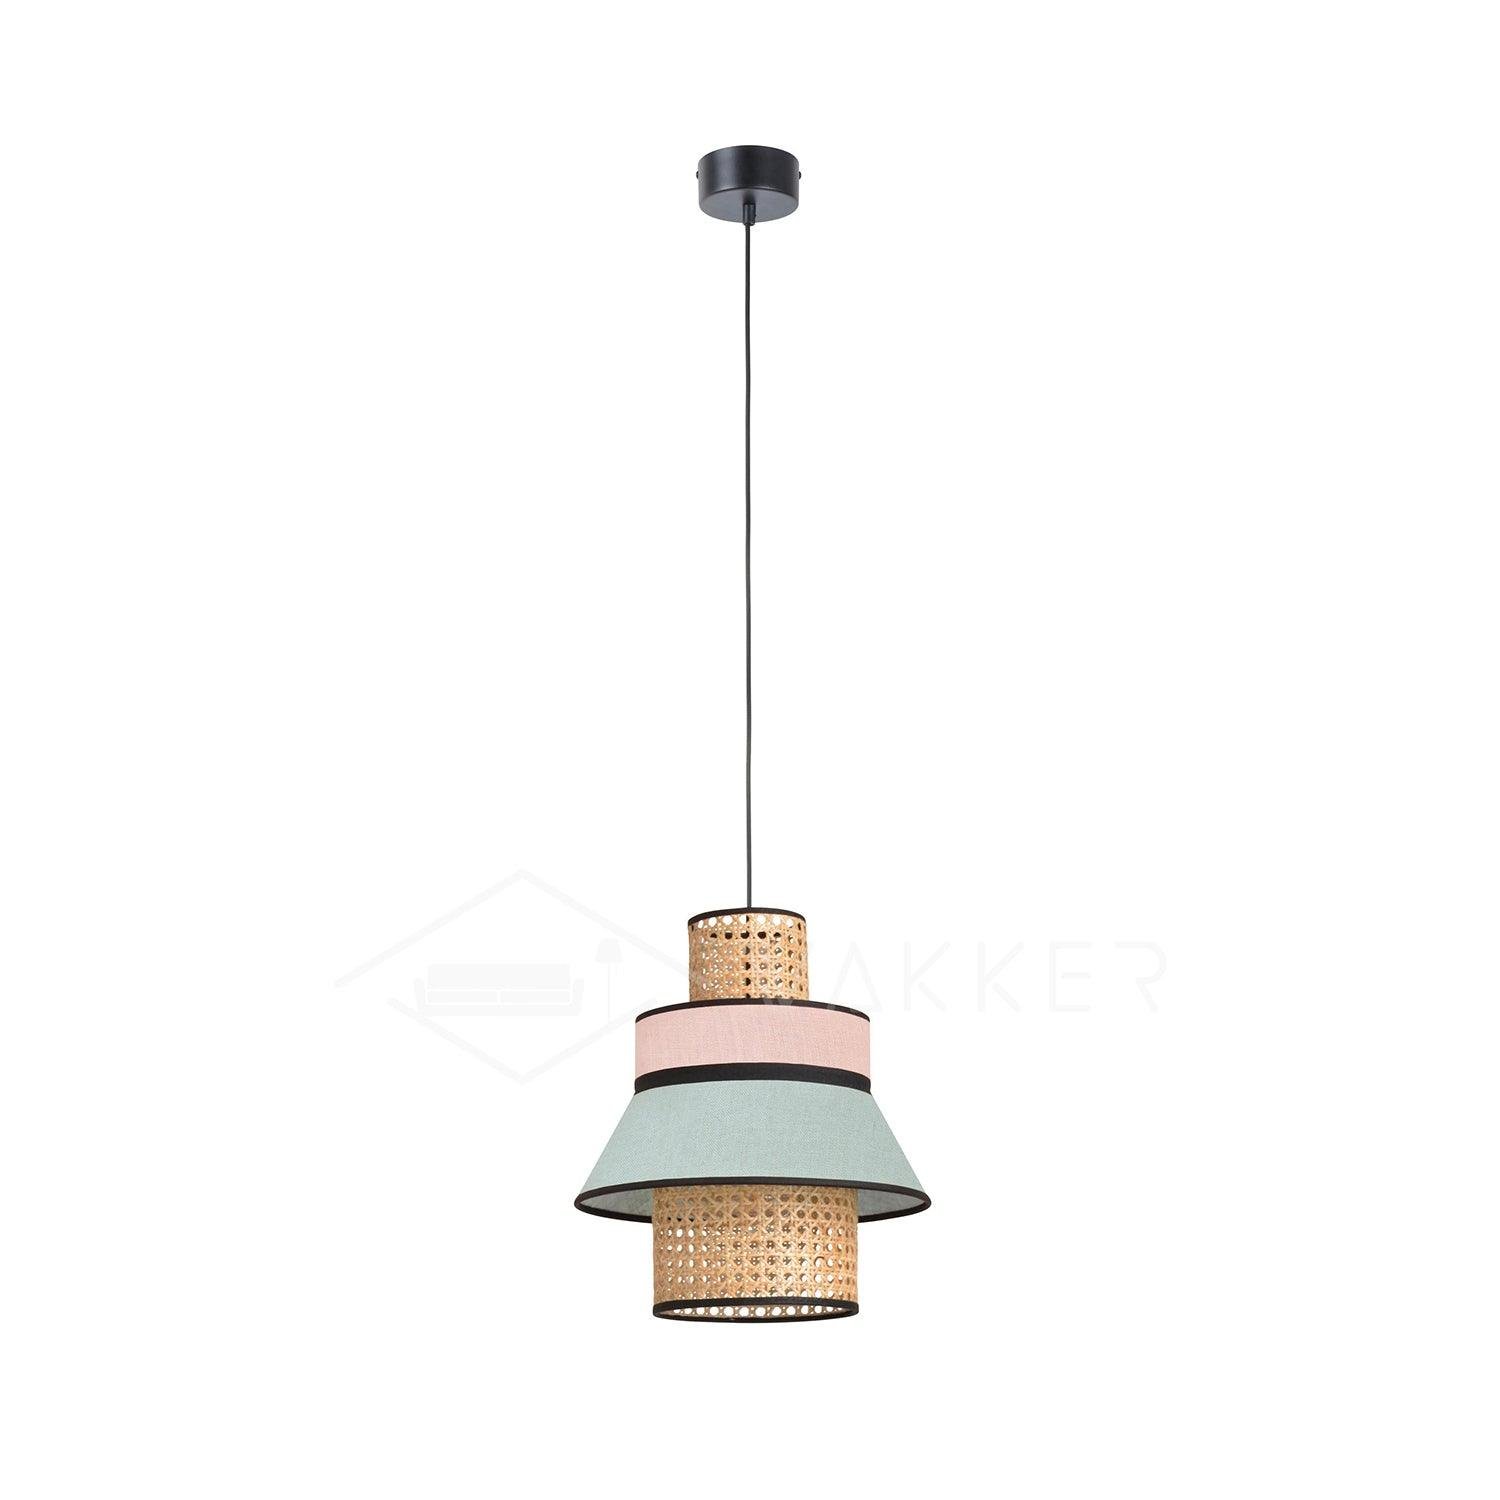 GM Suspended Lights in Almond Pink - Diameter 15.8" x Height 16.9" (40cm x 43cm) - From Singapour